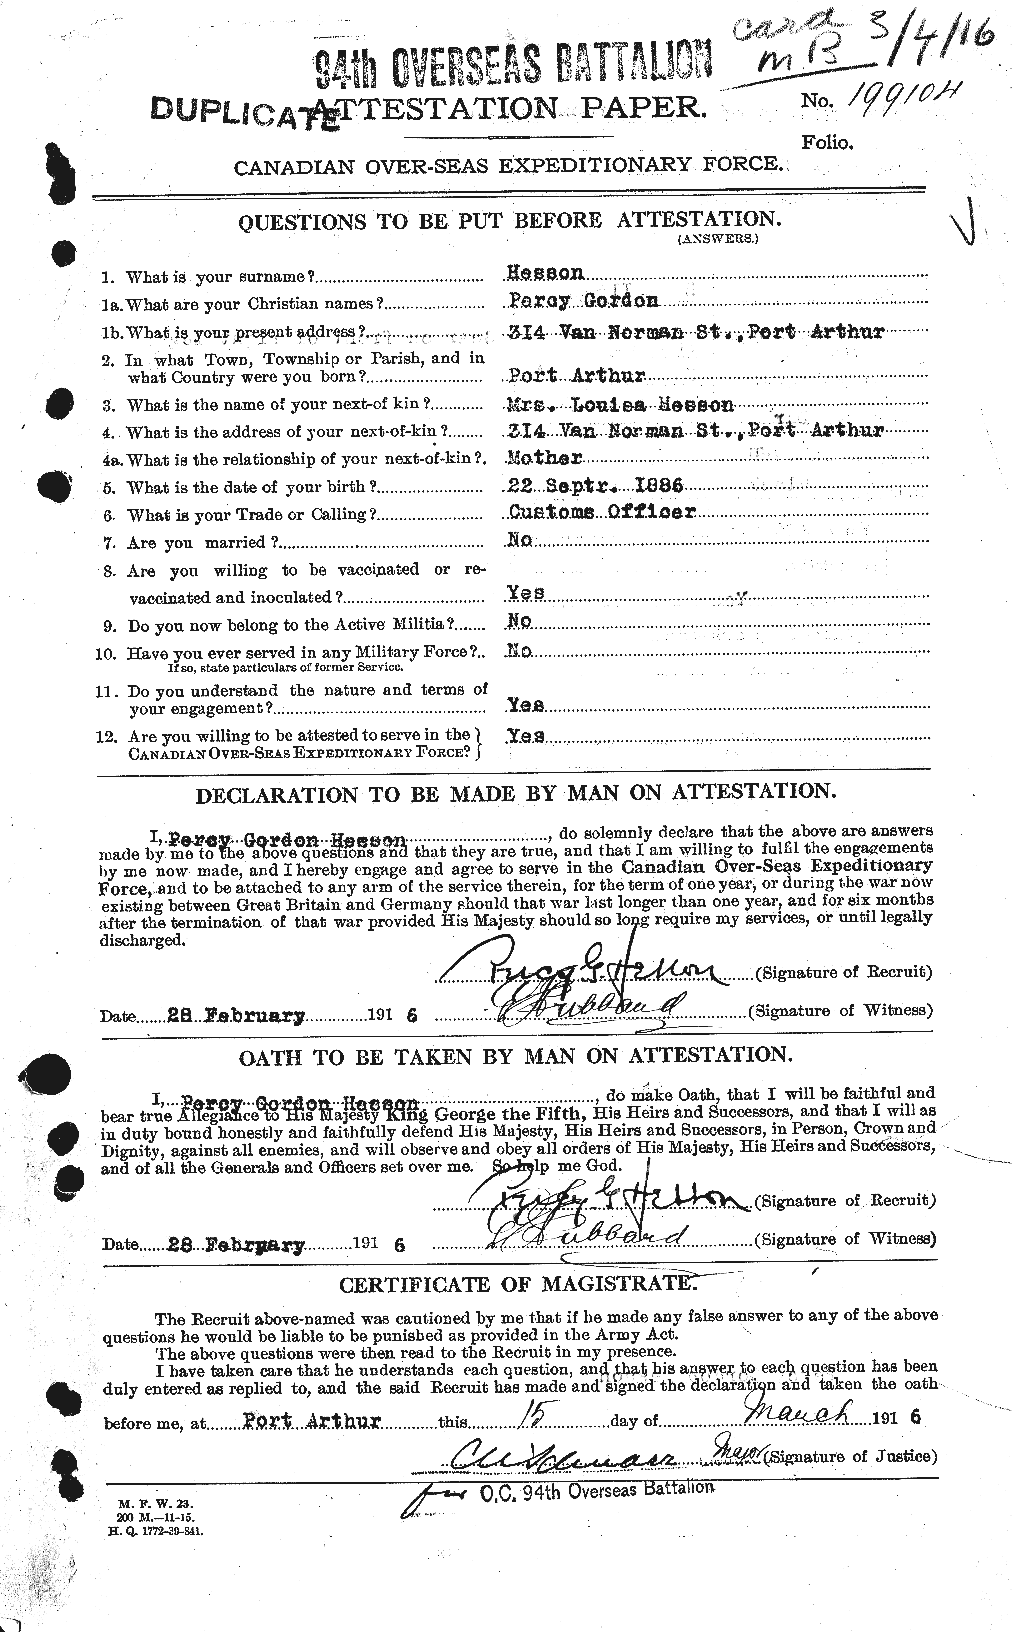 Personnel Records of the First World War - CEF 390642a